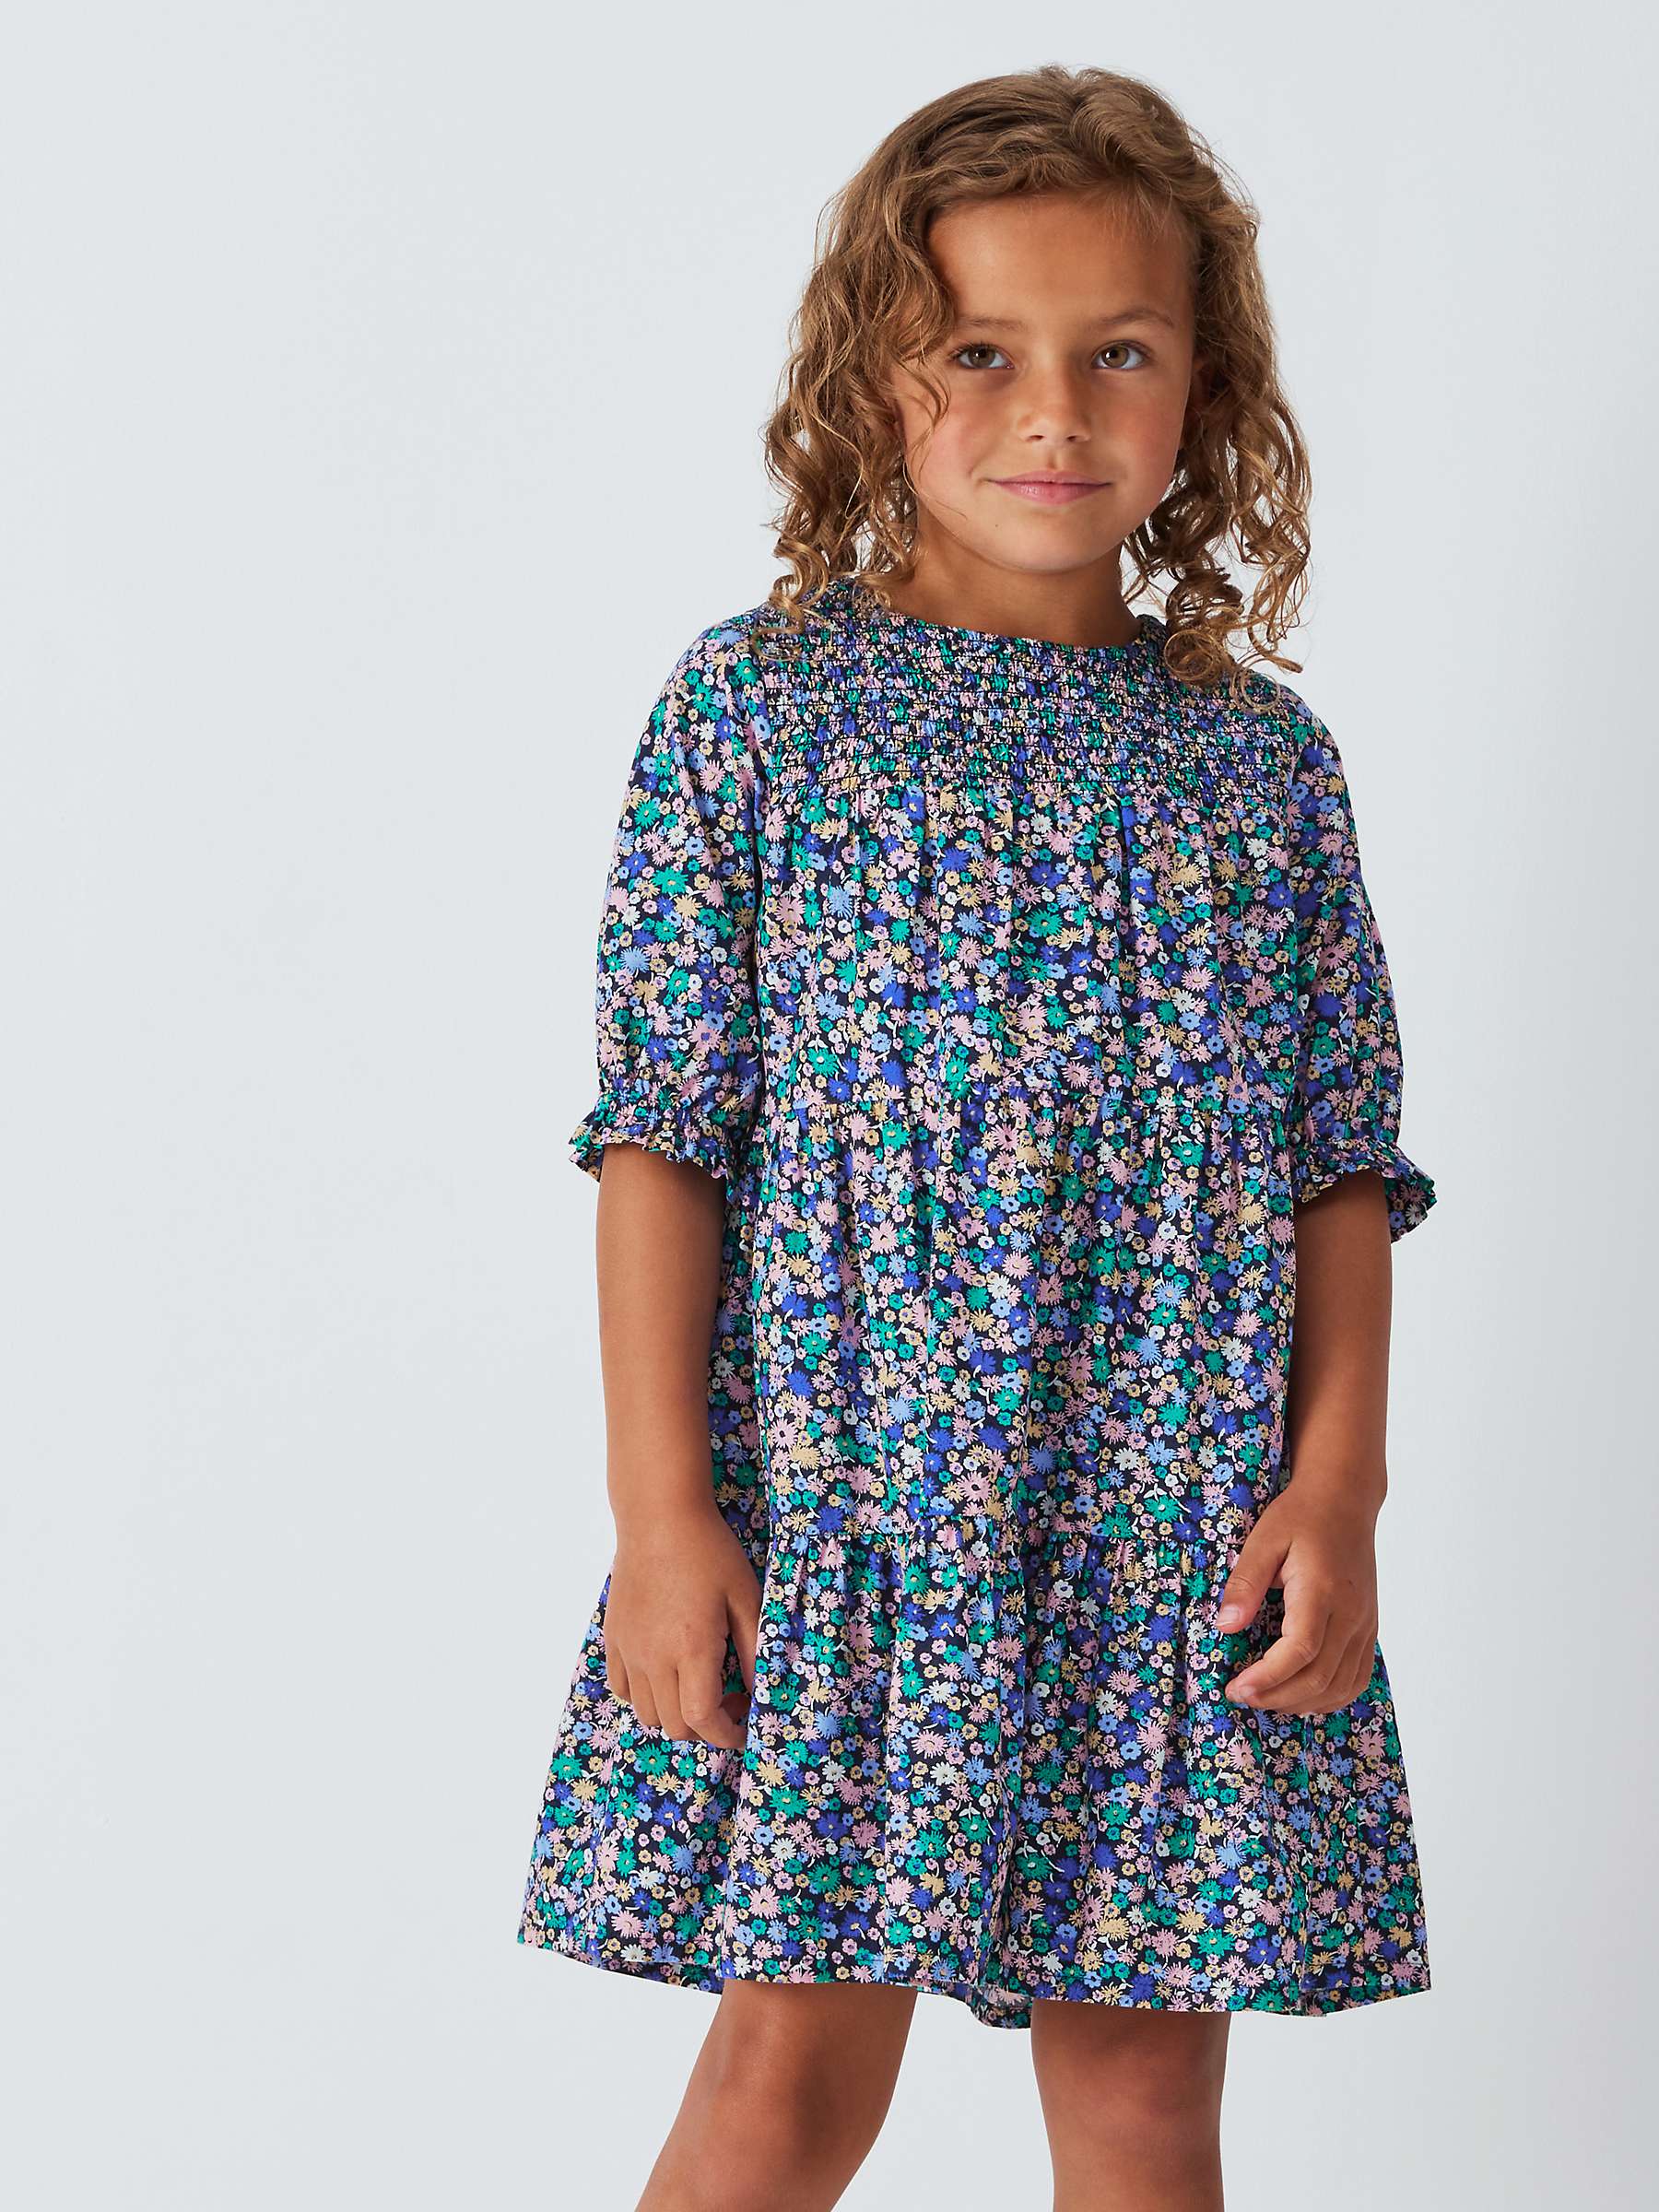 Buy John Lewis Kids' Floral Tiered Dress, Outer Space Online at johnlewis.com